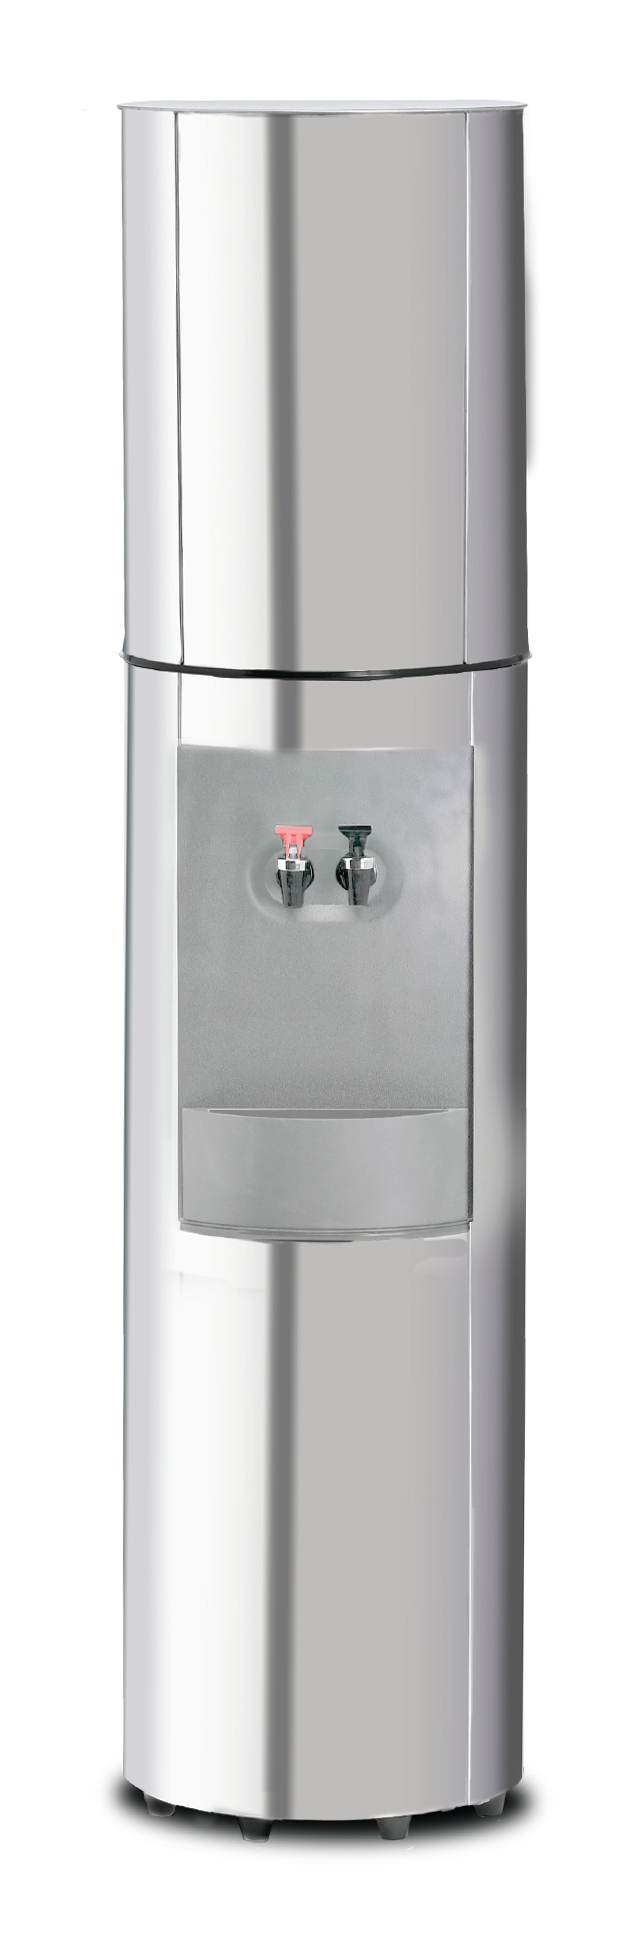 Stainless Steel Water Dispenser  Water Dispenser Hot and Cold